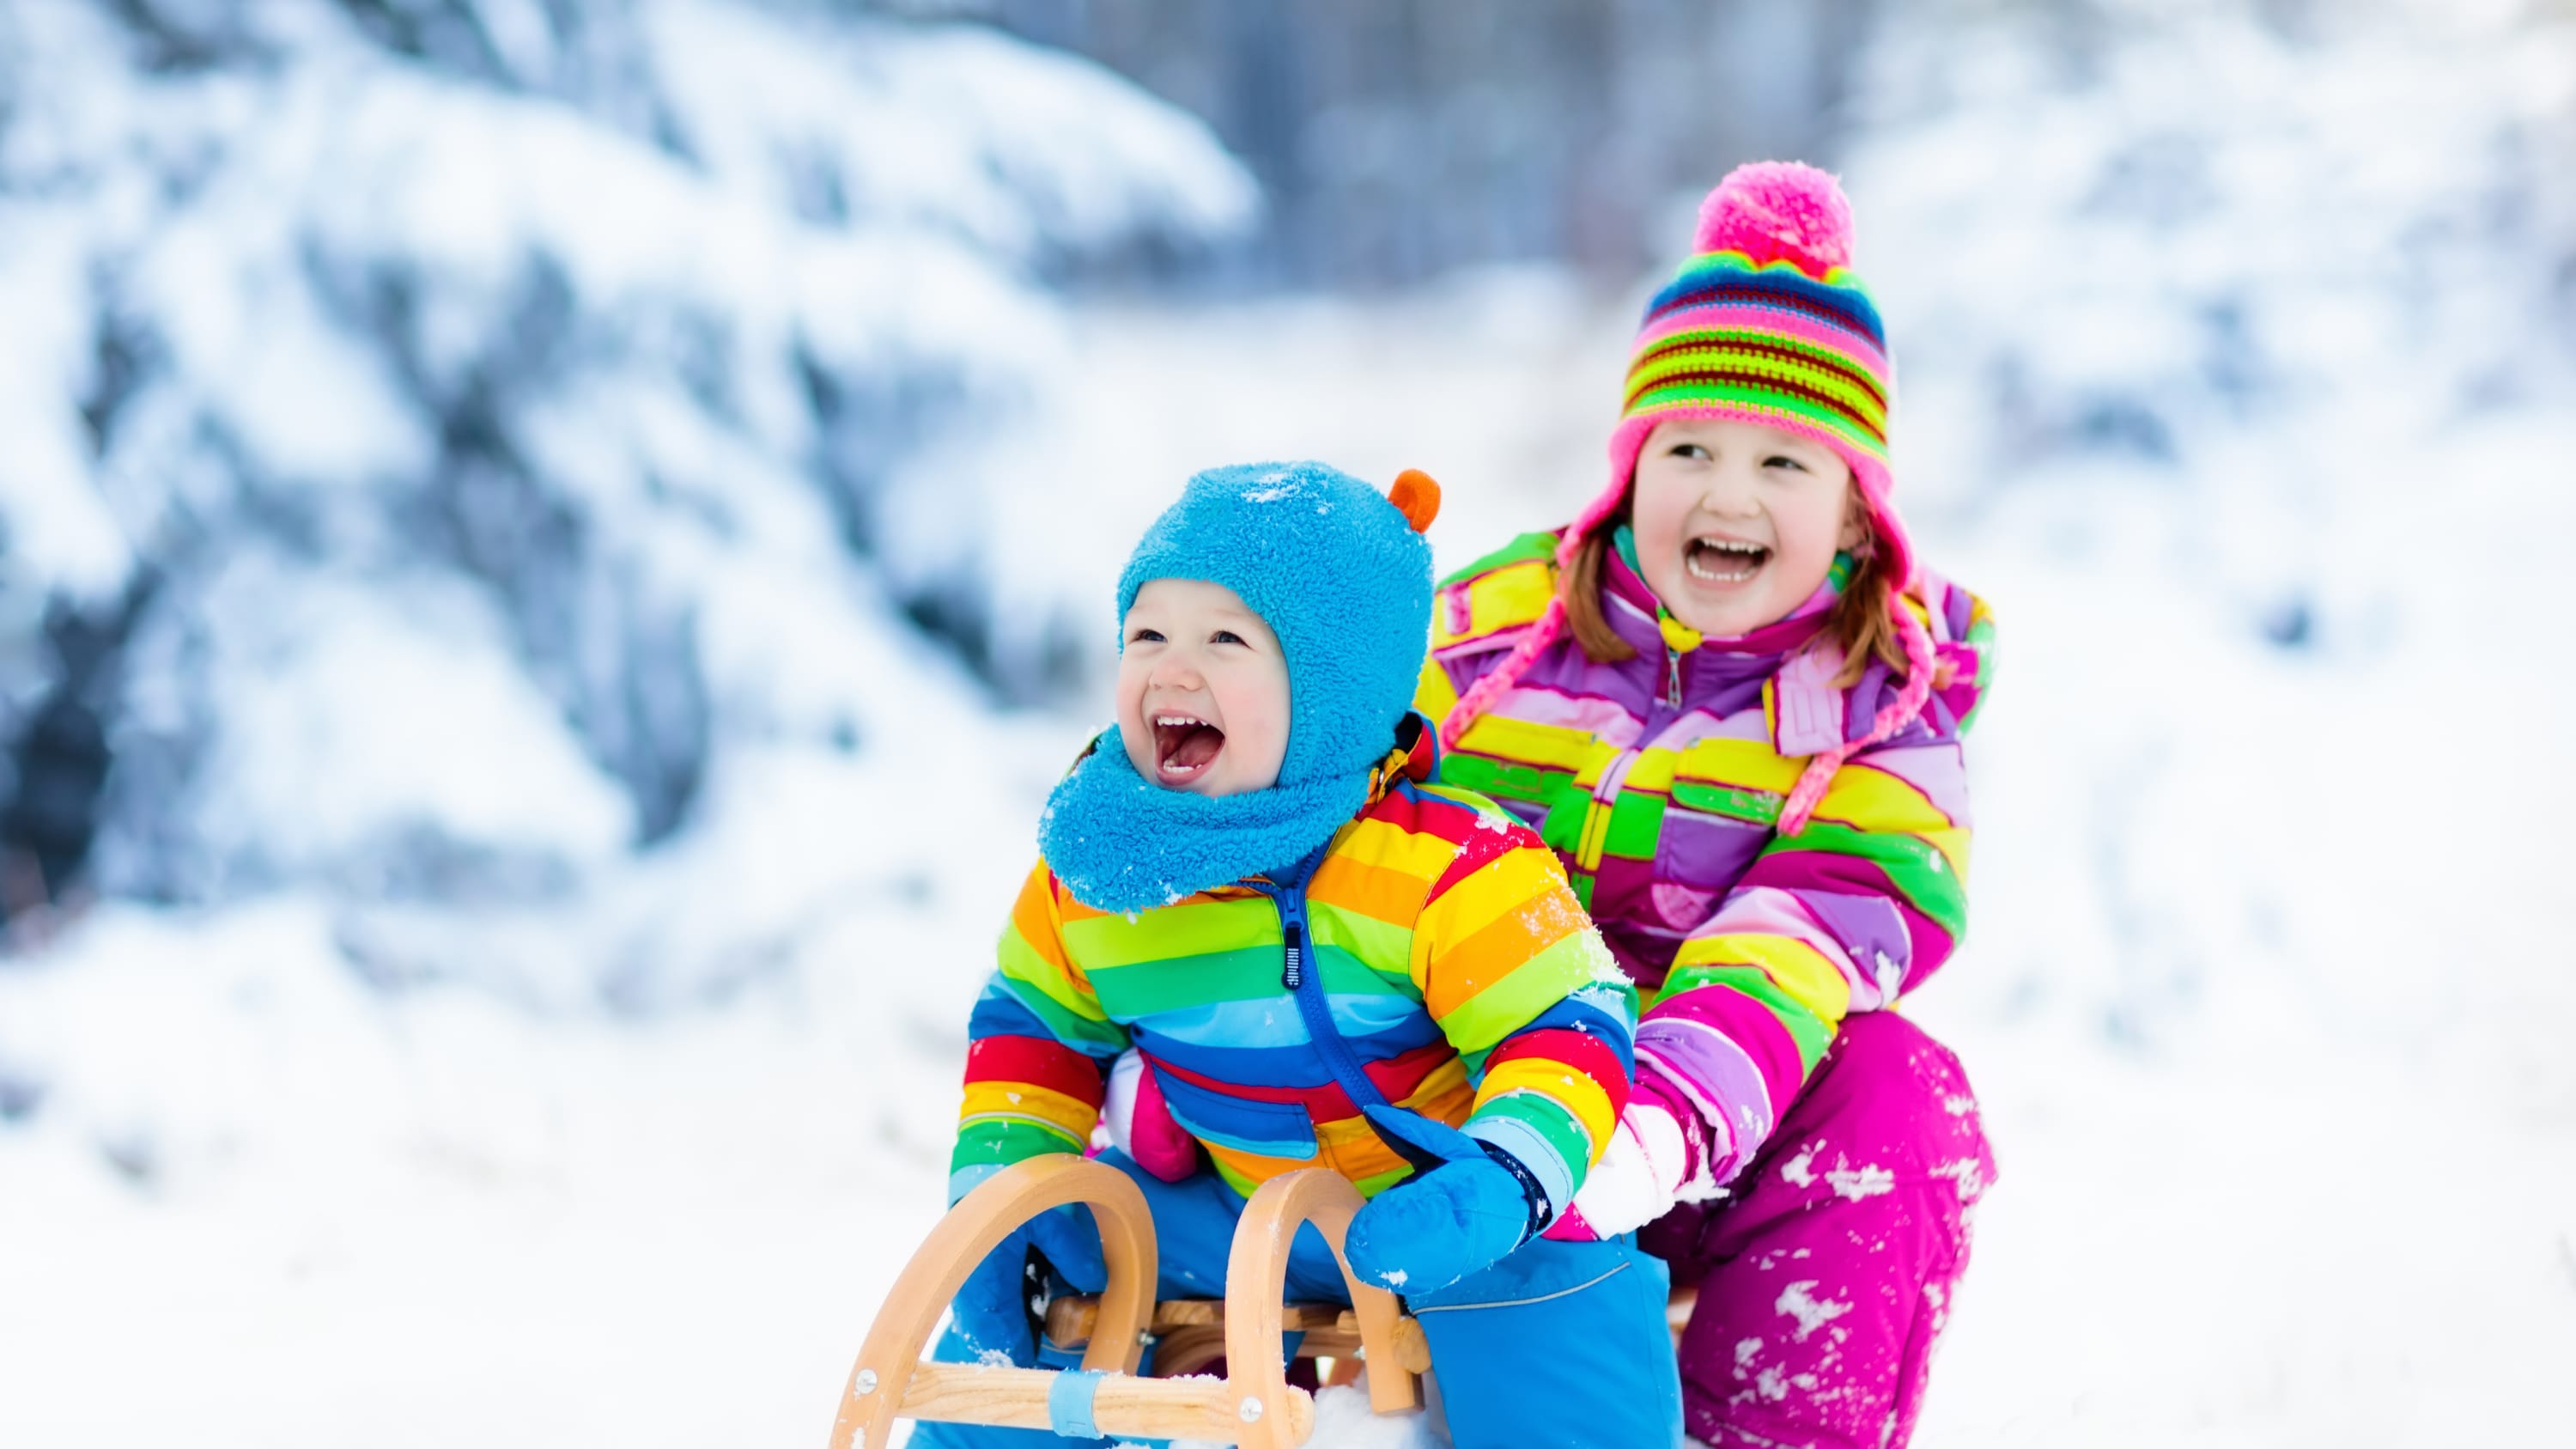 Two children are sledding while wearing colorful outerwear.